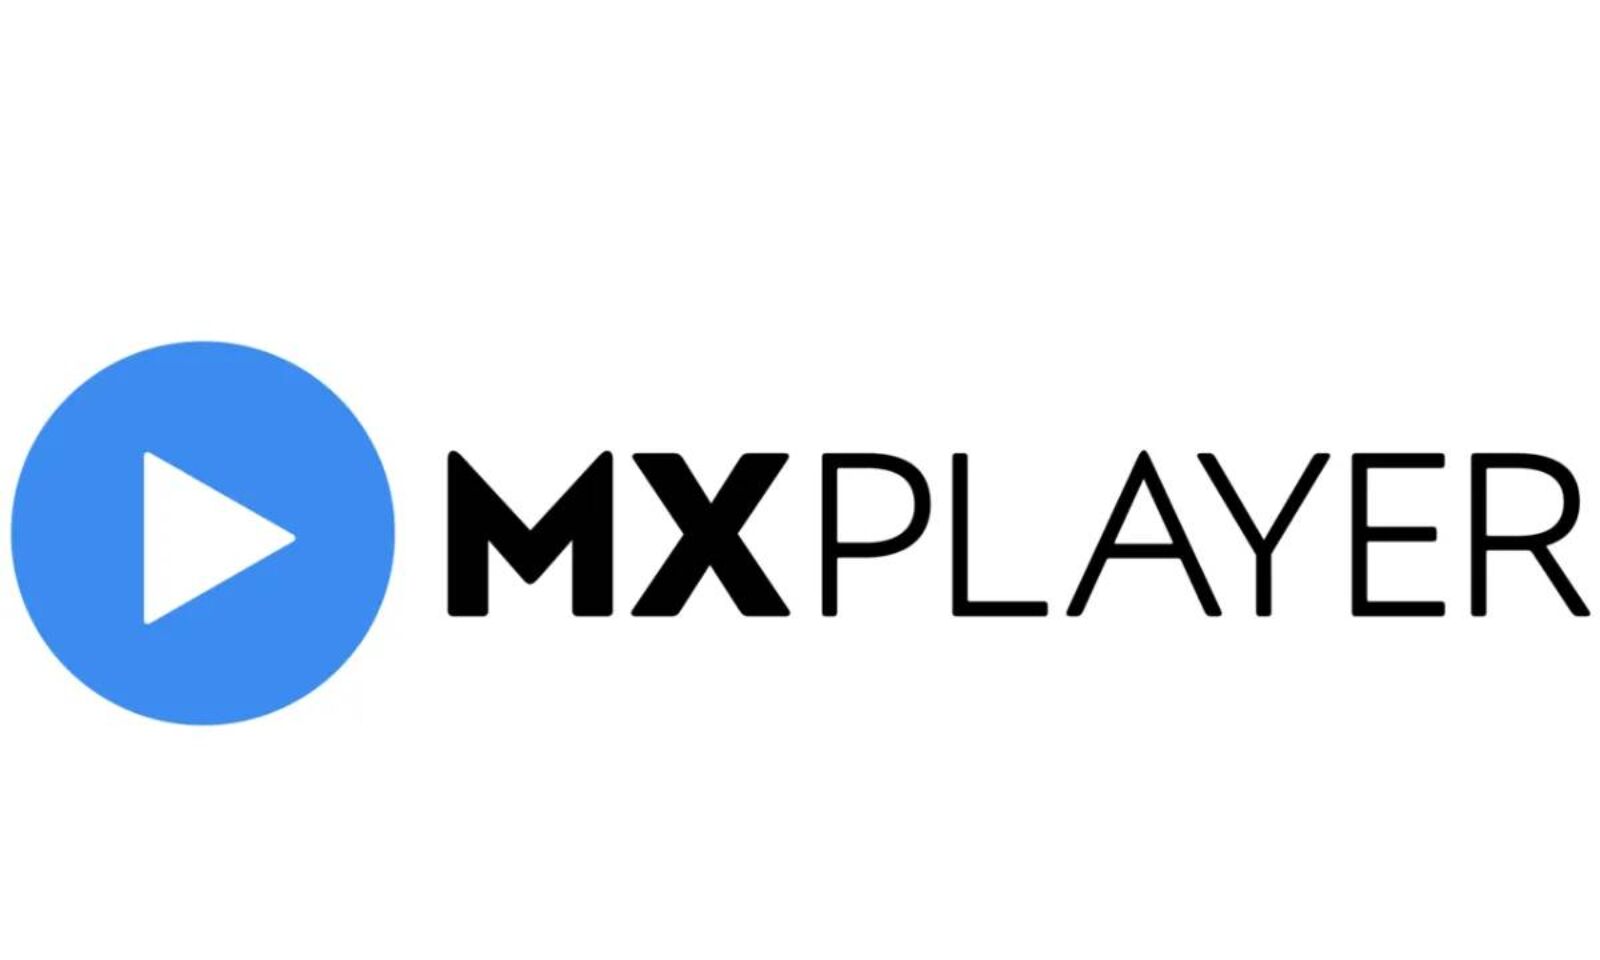 Mxplayer Music Videos, Latest Movies, Watch Web Series TV Shows for Free mxplayer.in